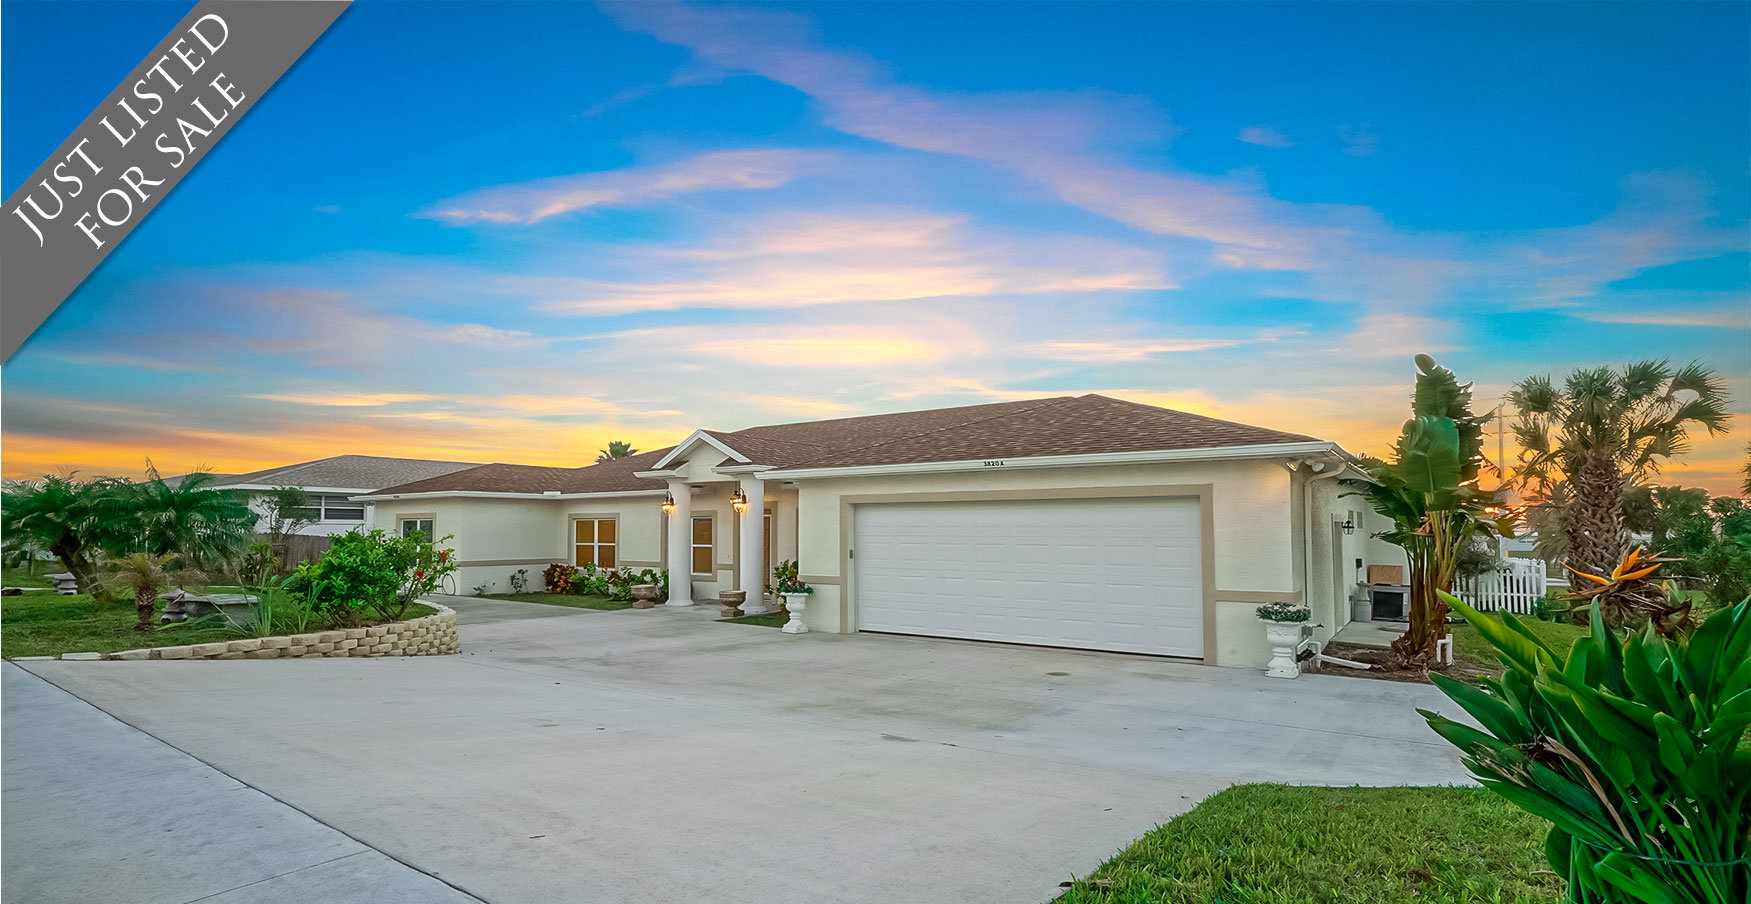 Daytona Beach Shores Homes For Sale with In-law Suite